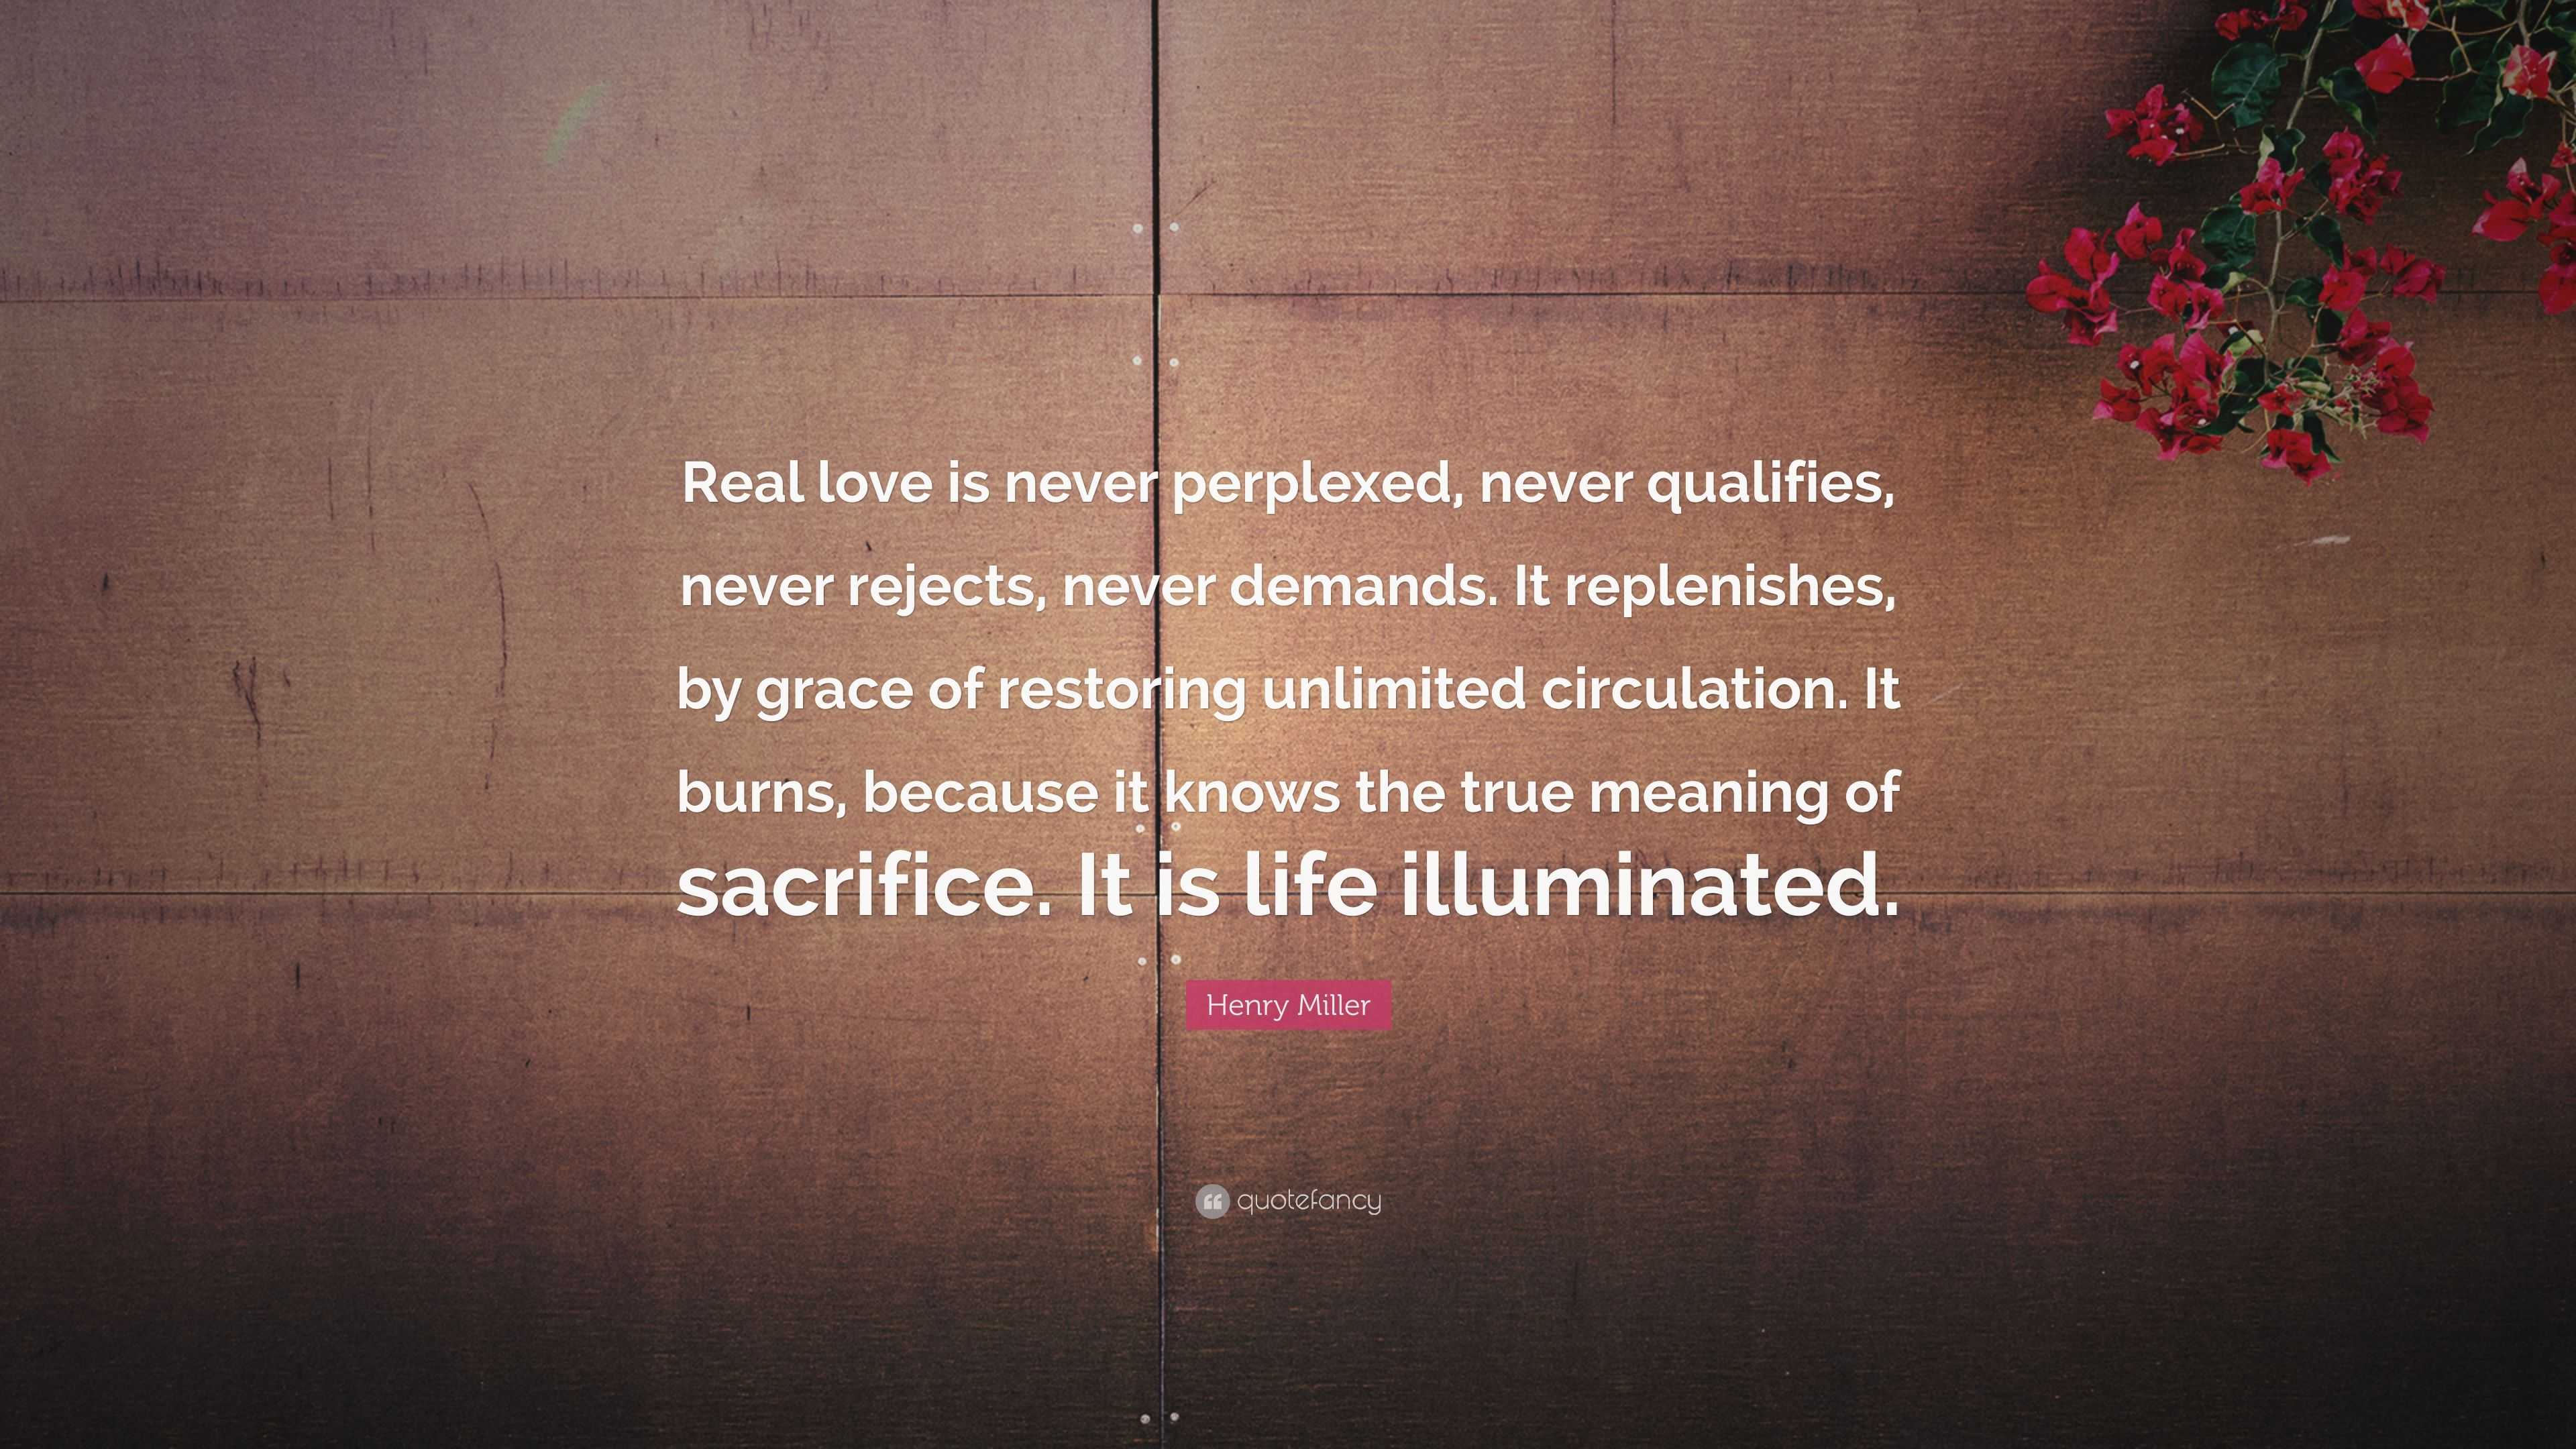 Henry Miller Quote “Real love is never perplexed never qualifies never rejects